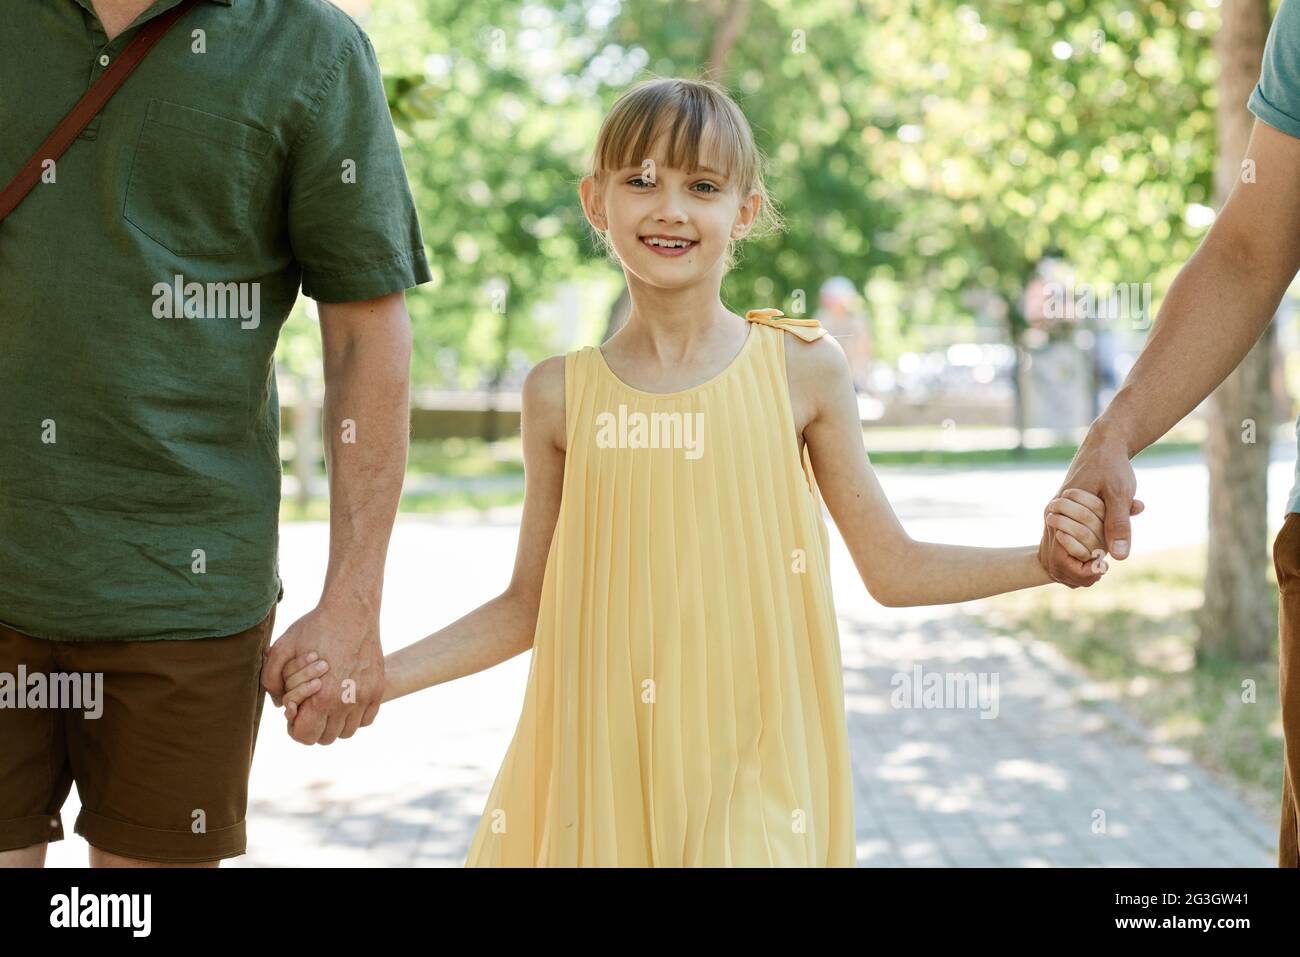 Portrait of little girl smiling at camera while walking in the park together with her family Stock Photo